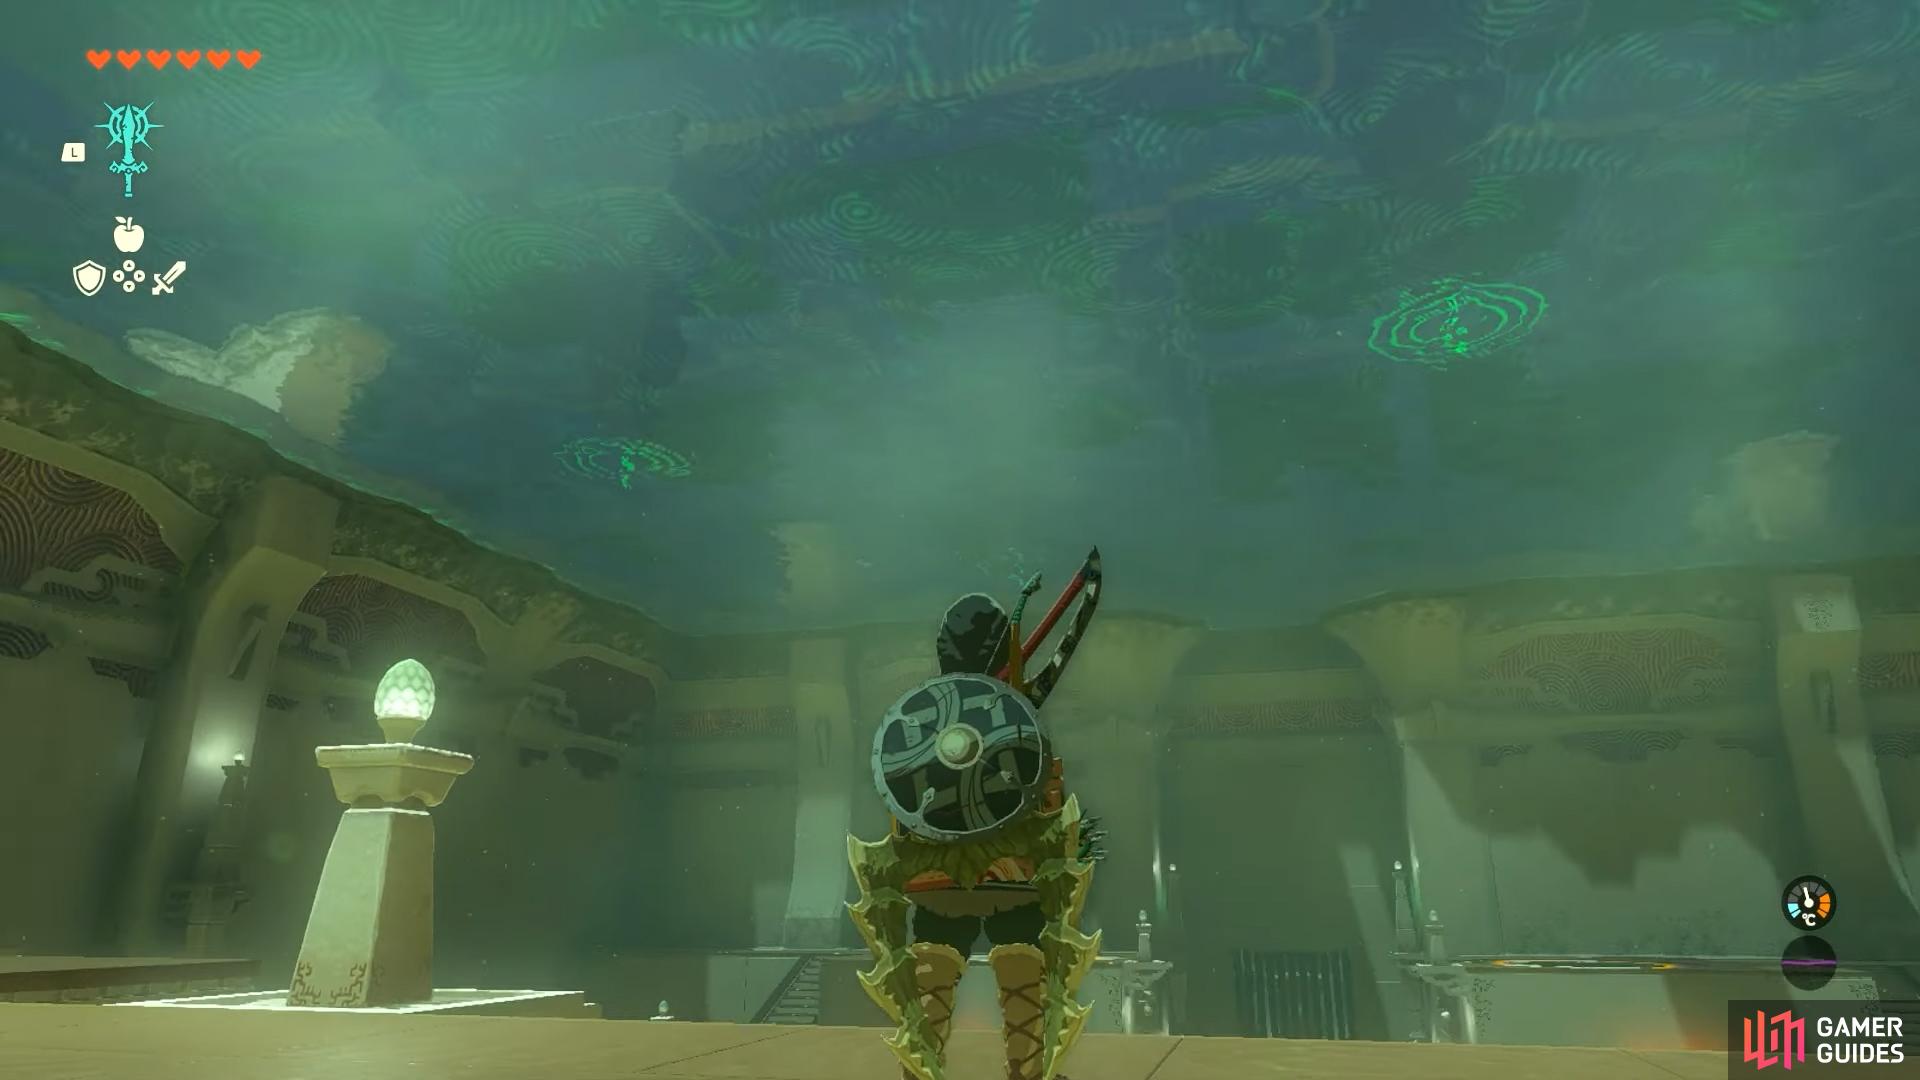 The green markers on the ceiling of the shrine indicating where to put the balls